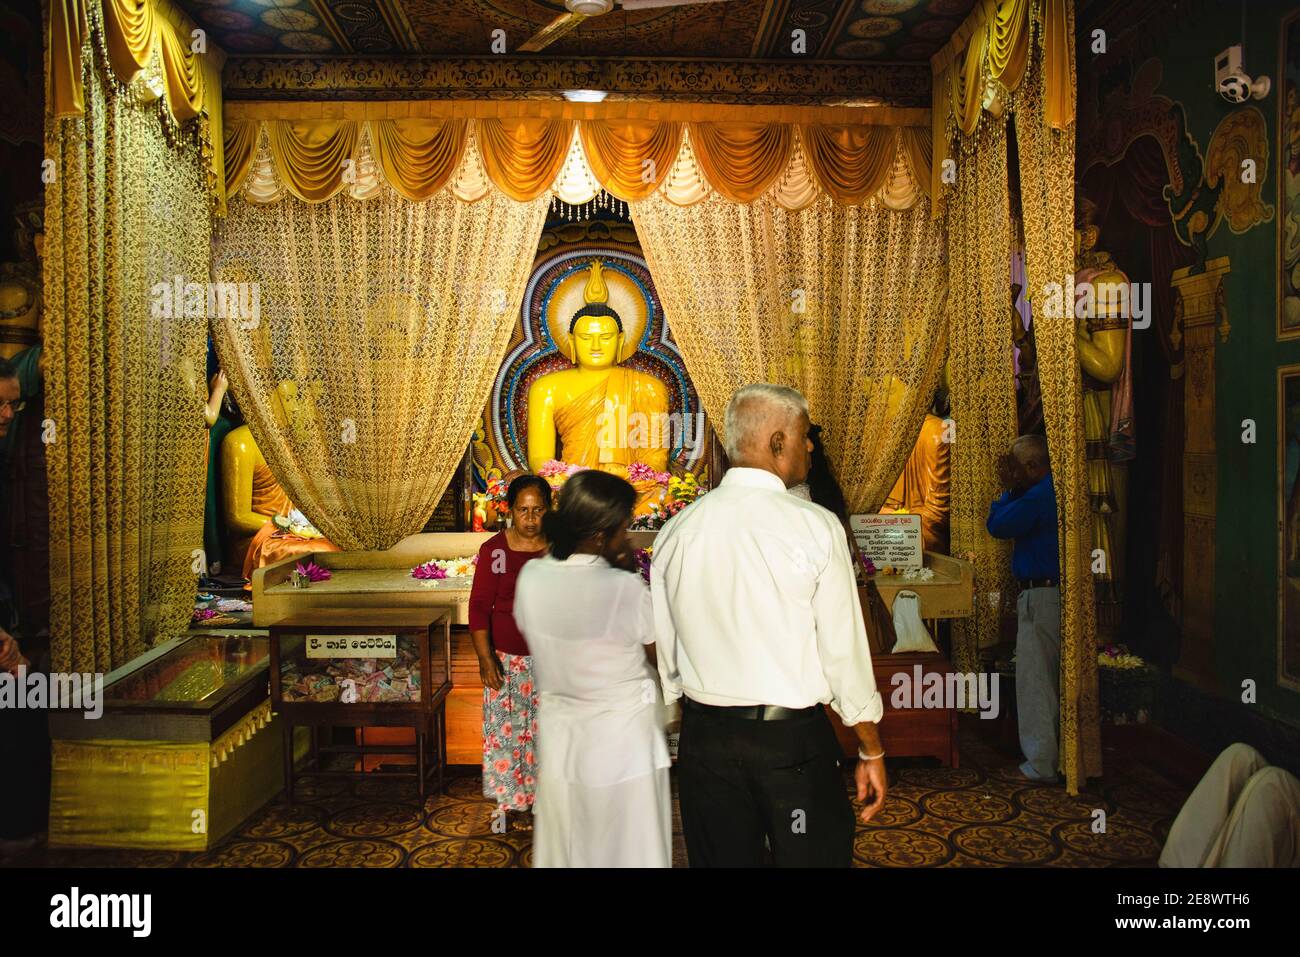 Sri Lanka. Sinhalese people standing in front of a golden buddha Statue in a temple at an altar. Stock Photo